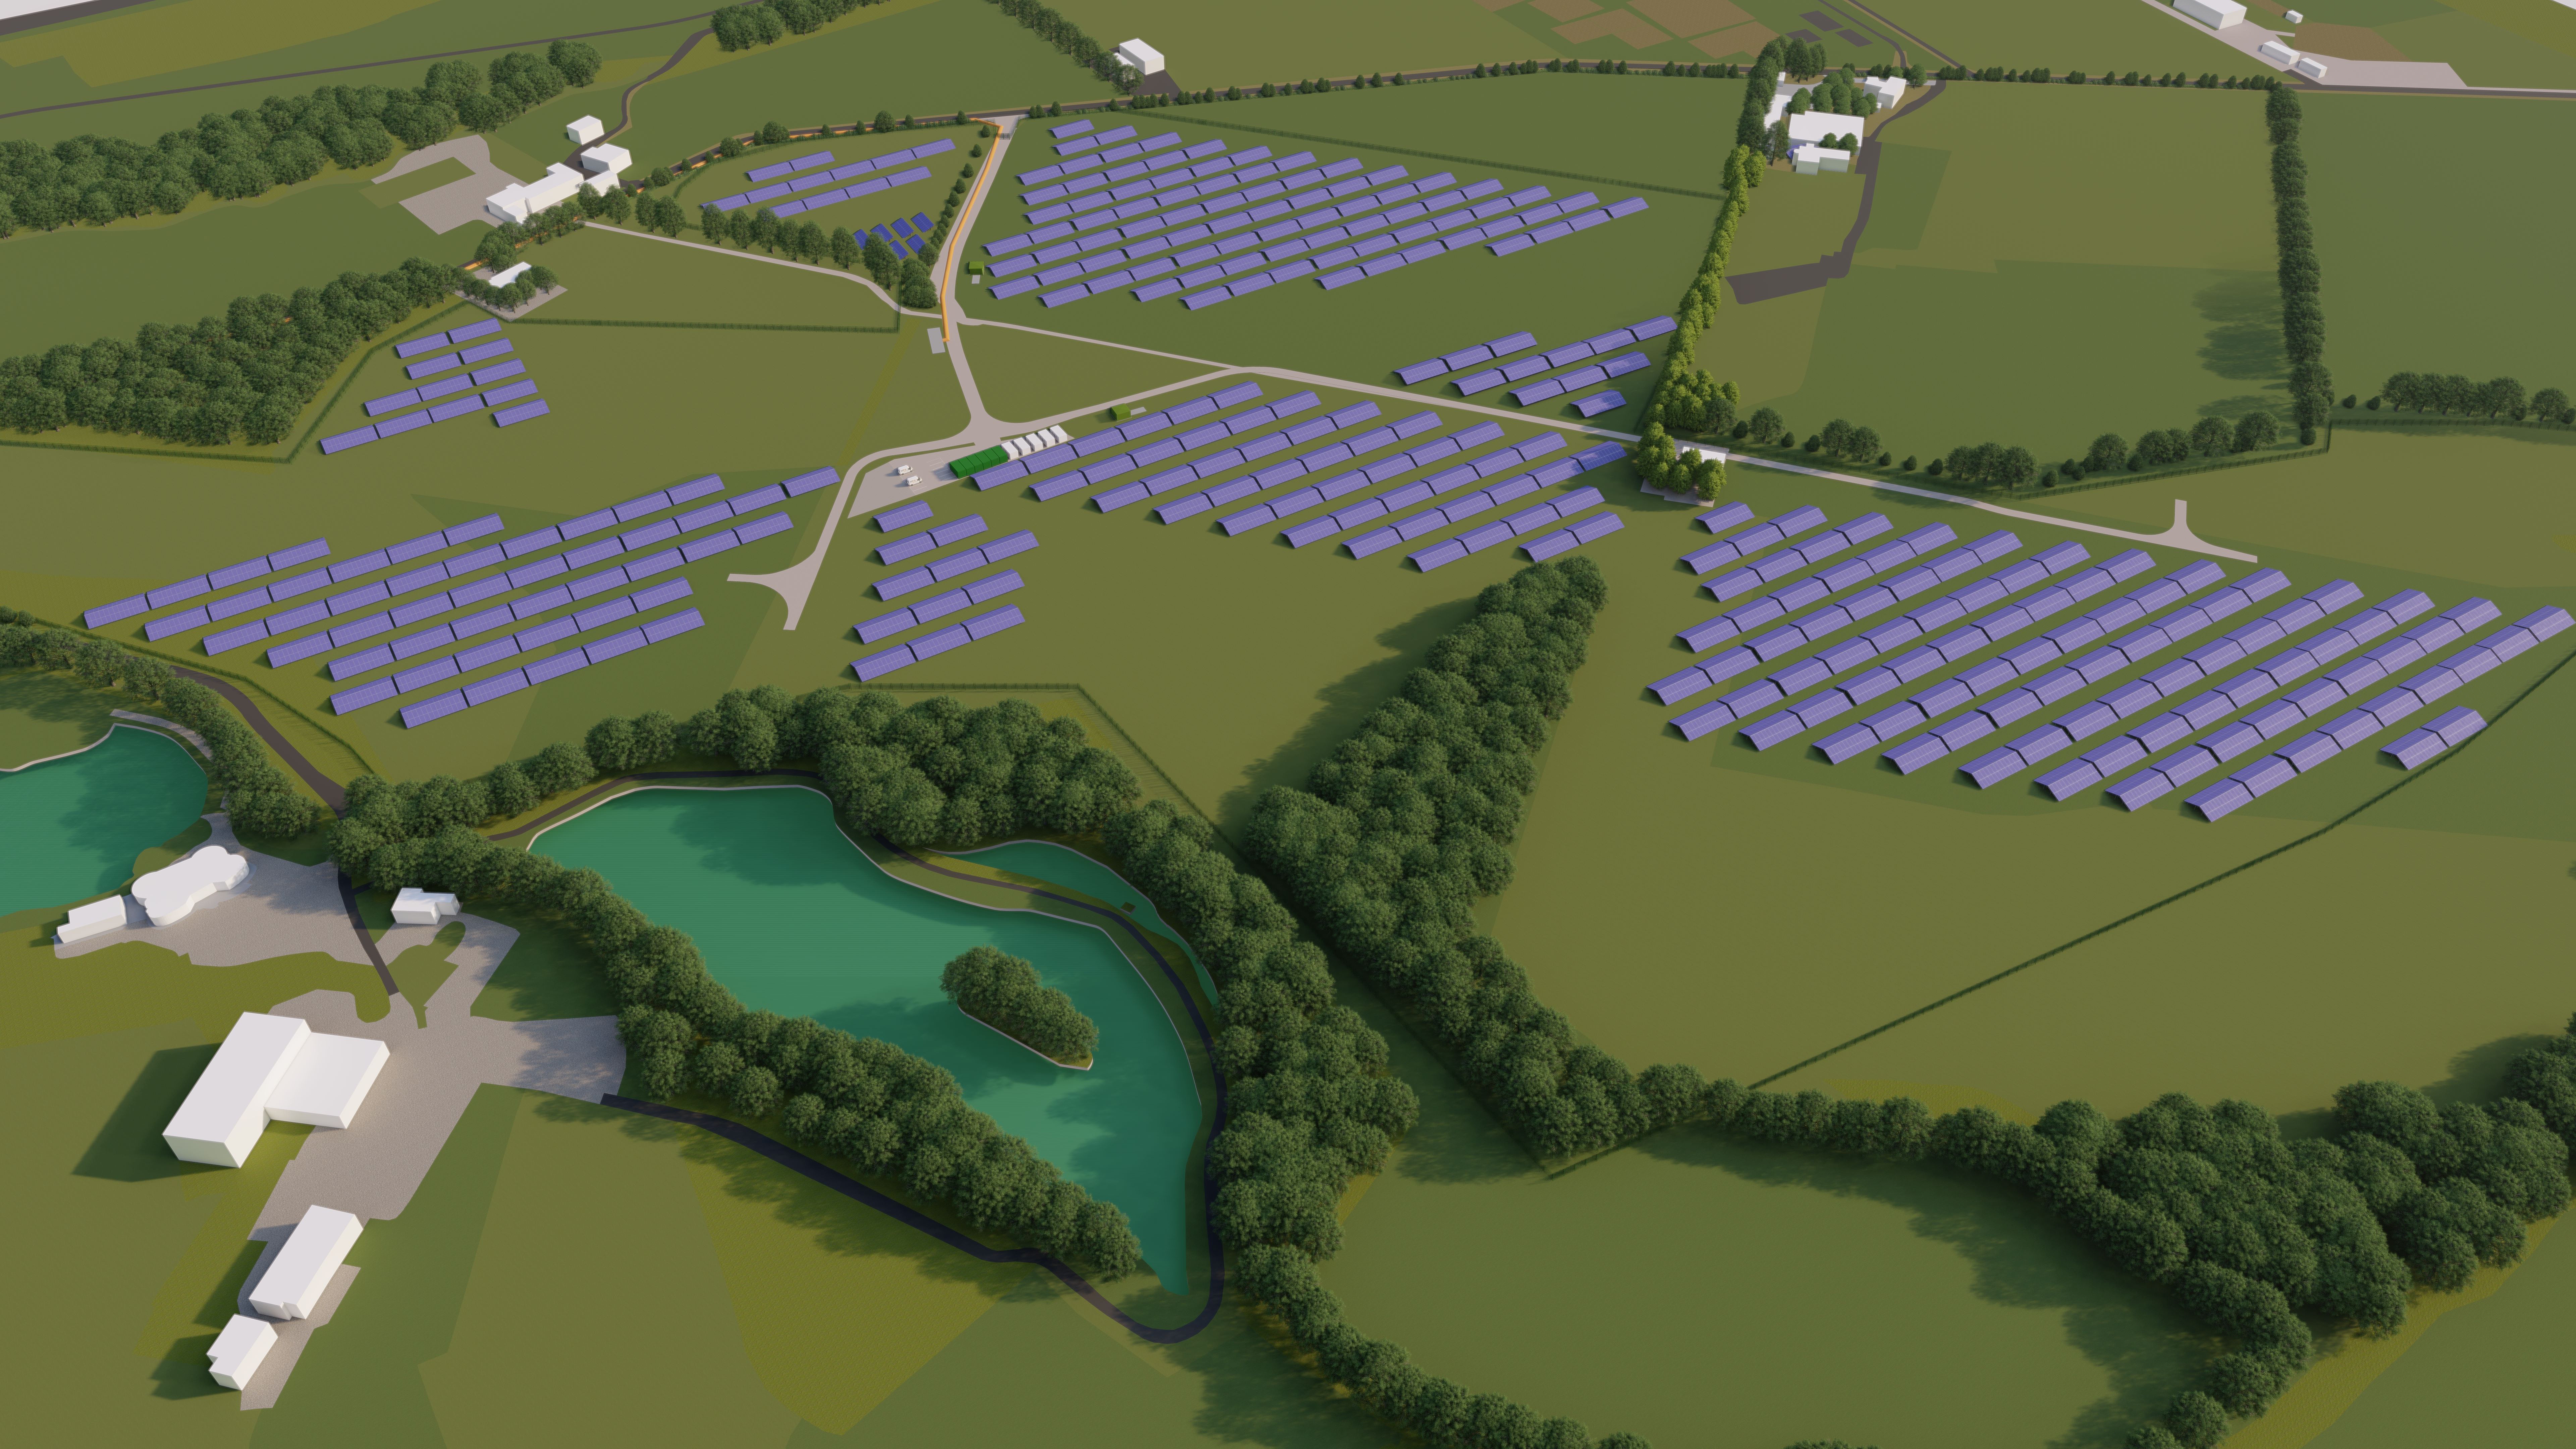 A projected image of the solar farm